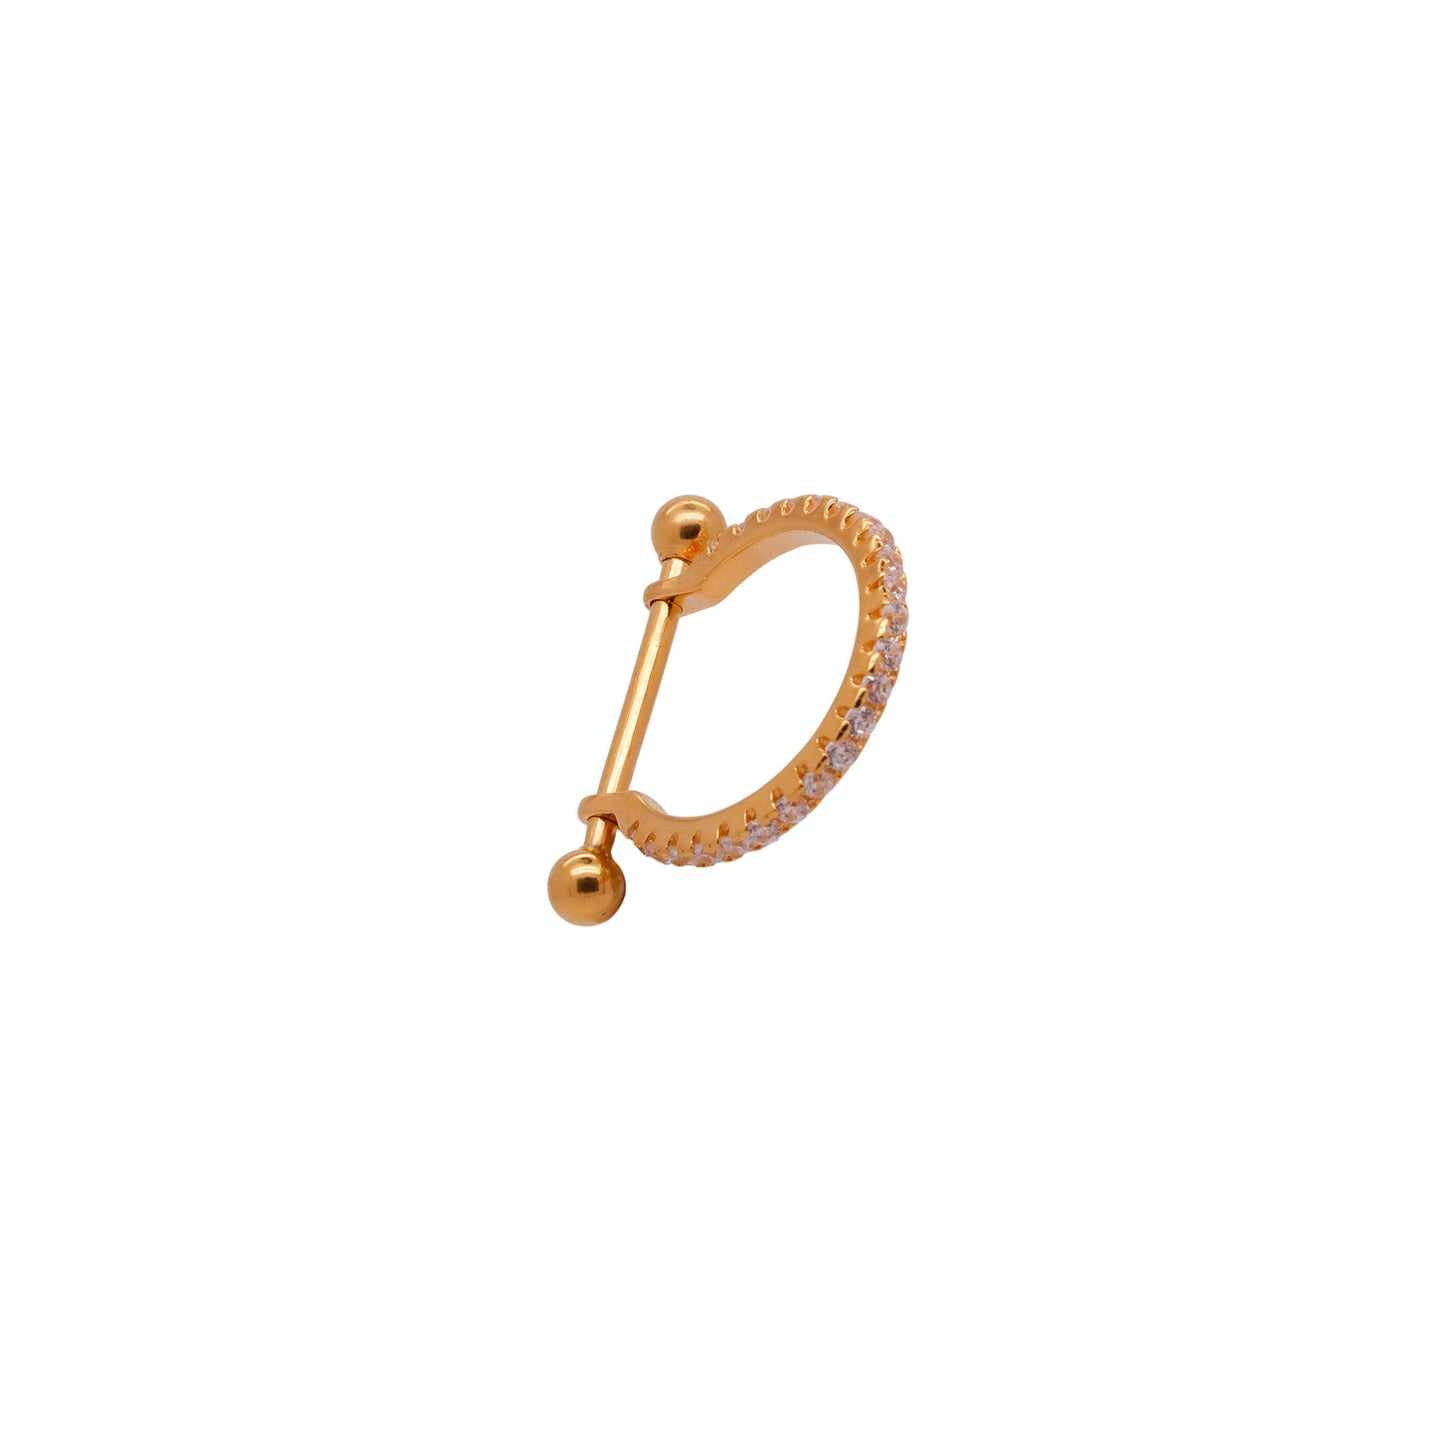 Vermeil | 925 Silver 24k Gold Coated 16G/18G CZ Eternity Band Conch Hoop Earring | Cartilage | Lobe | Conch | 10mm 12mm - Sturdy South